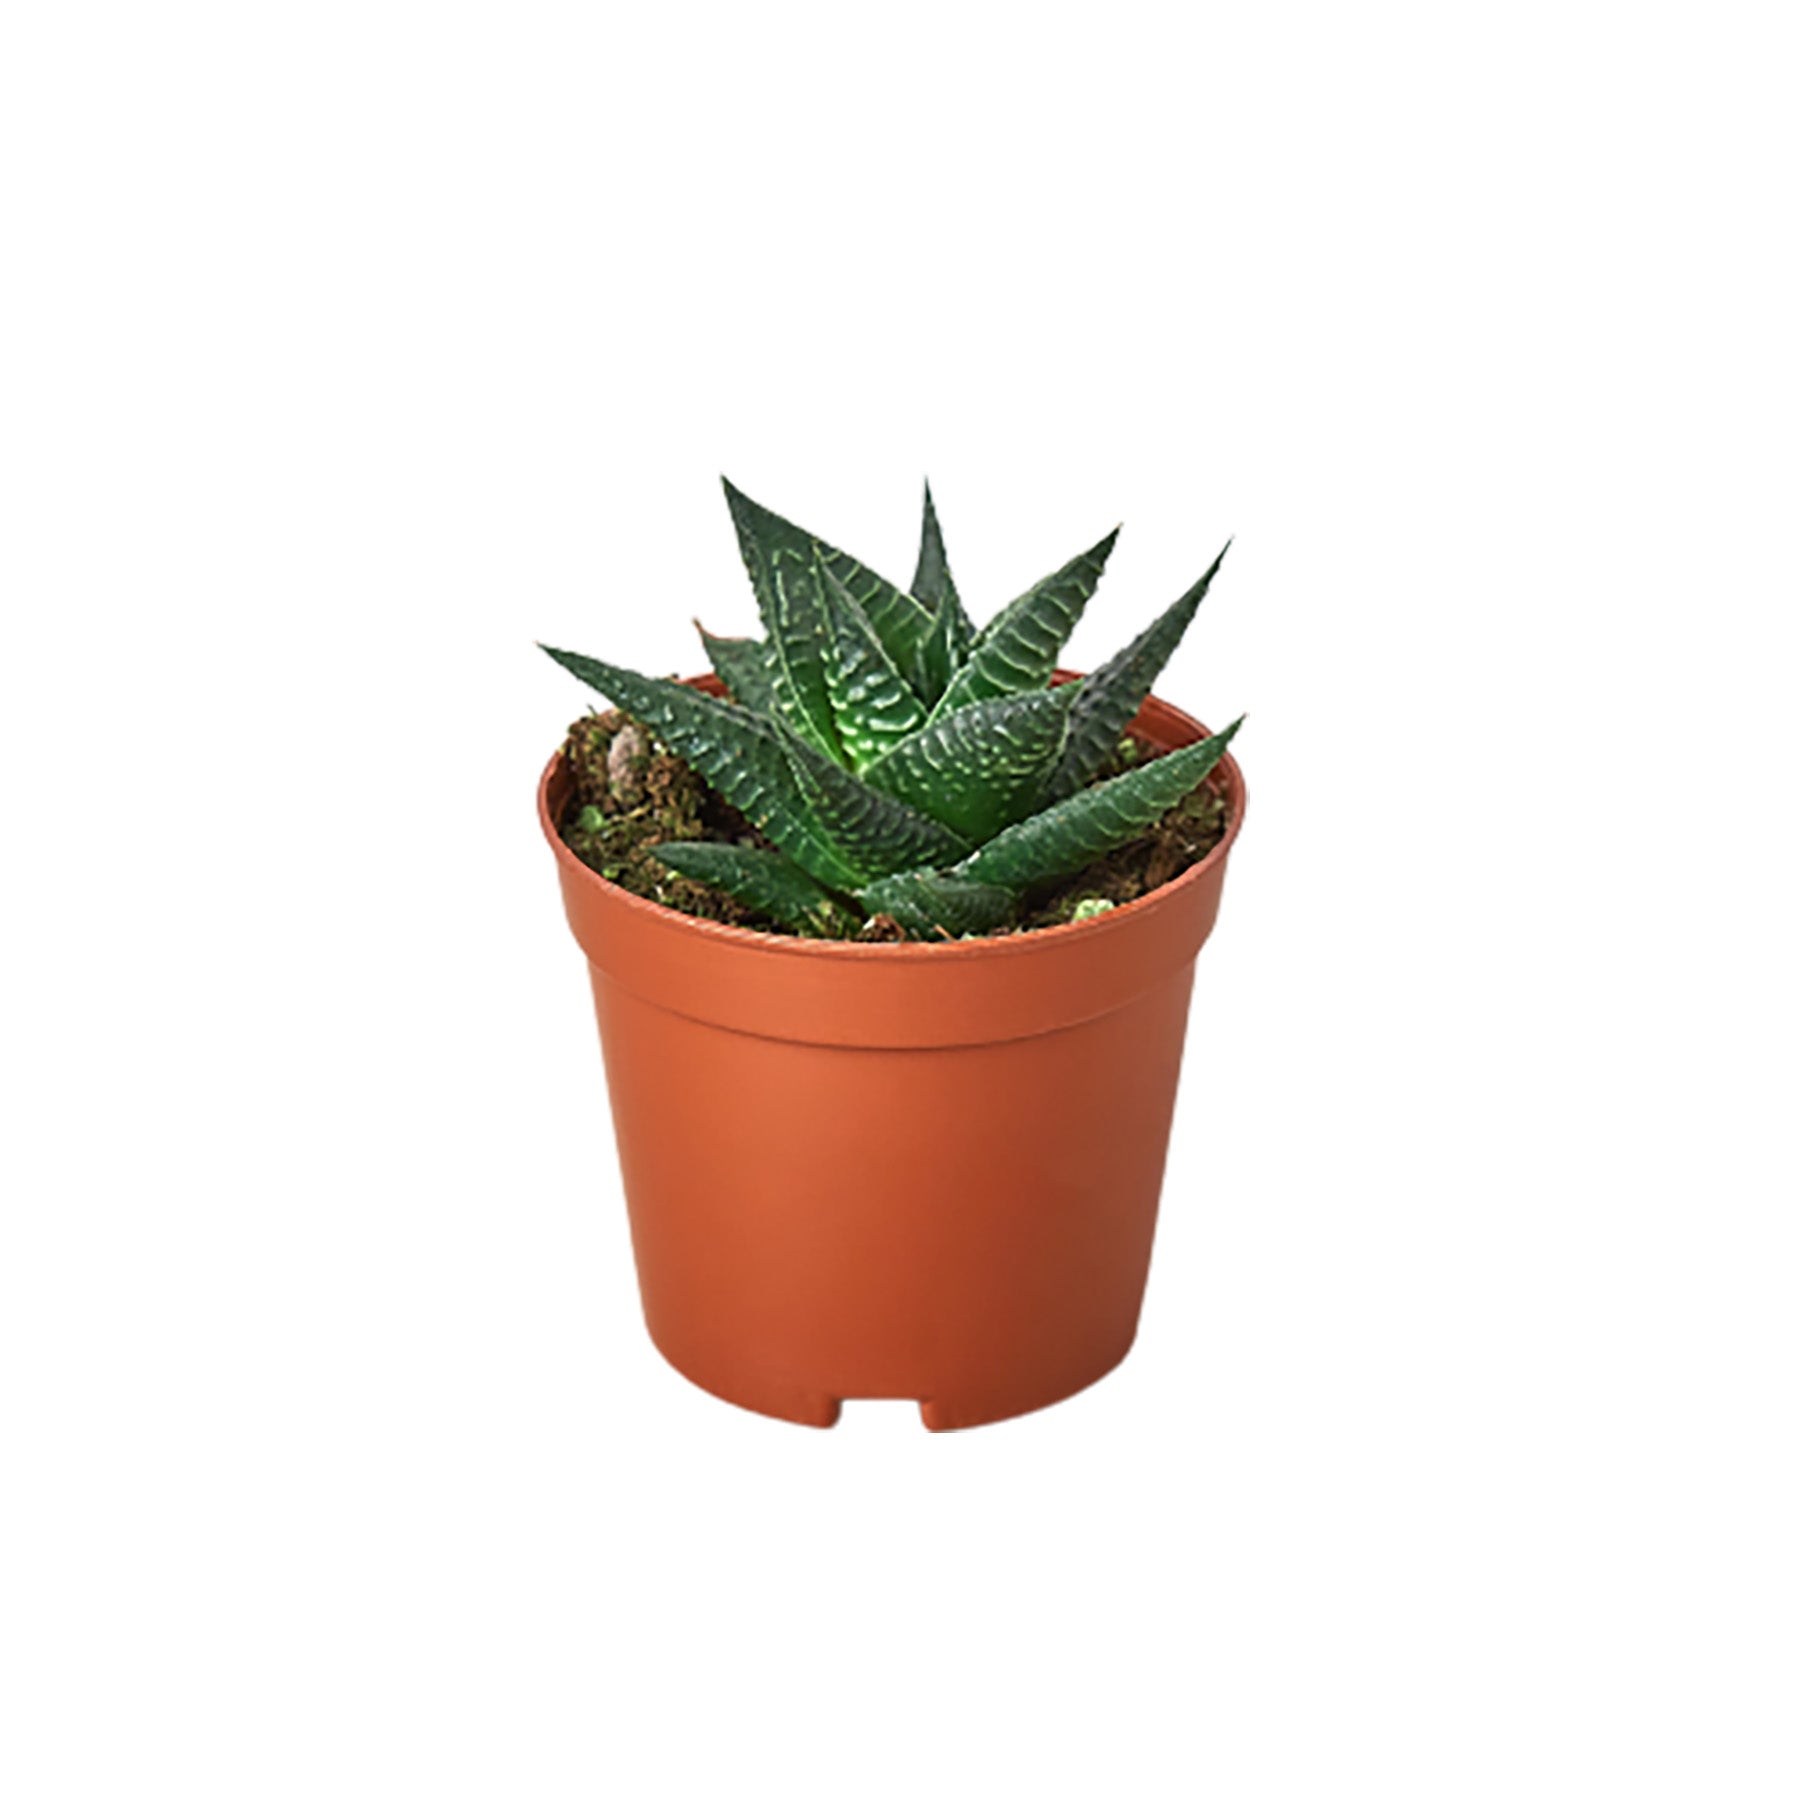 An aloe vera plant in a pot on a white background, purchased from one of the best garden nurseries near me.